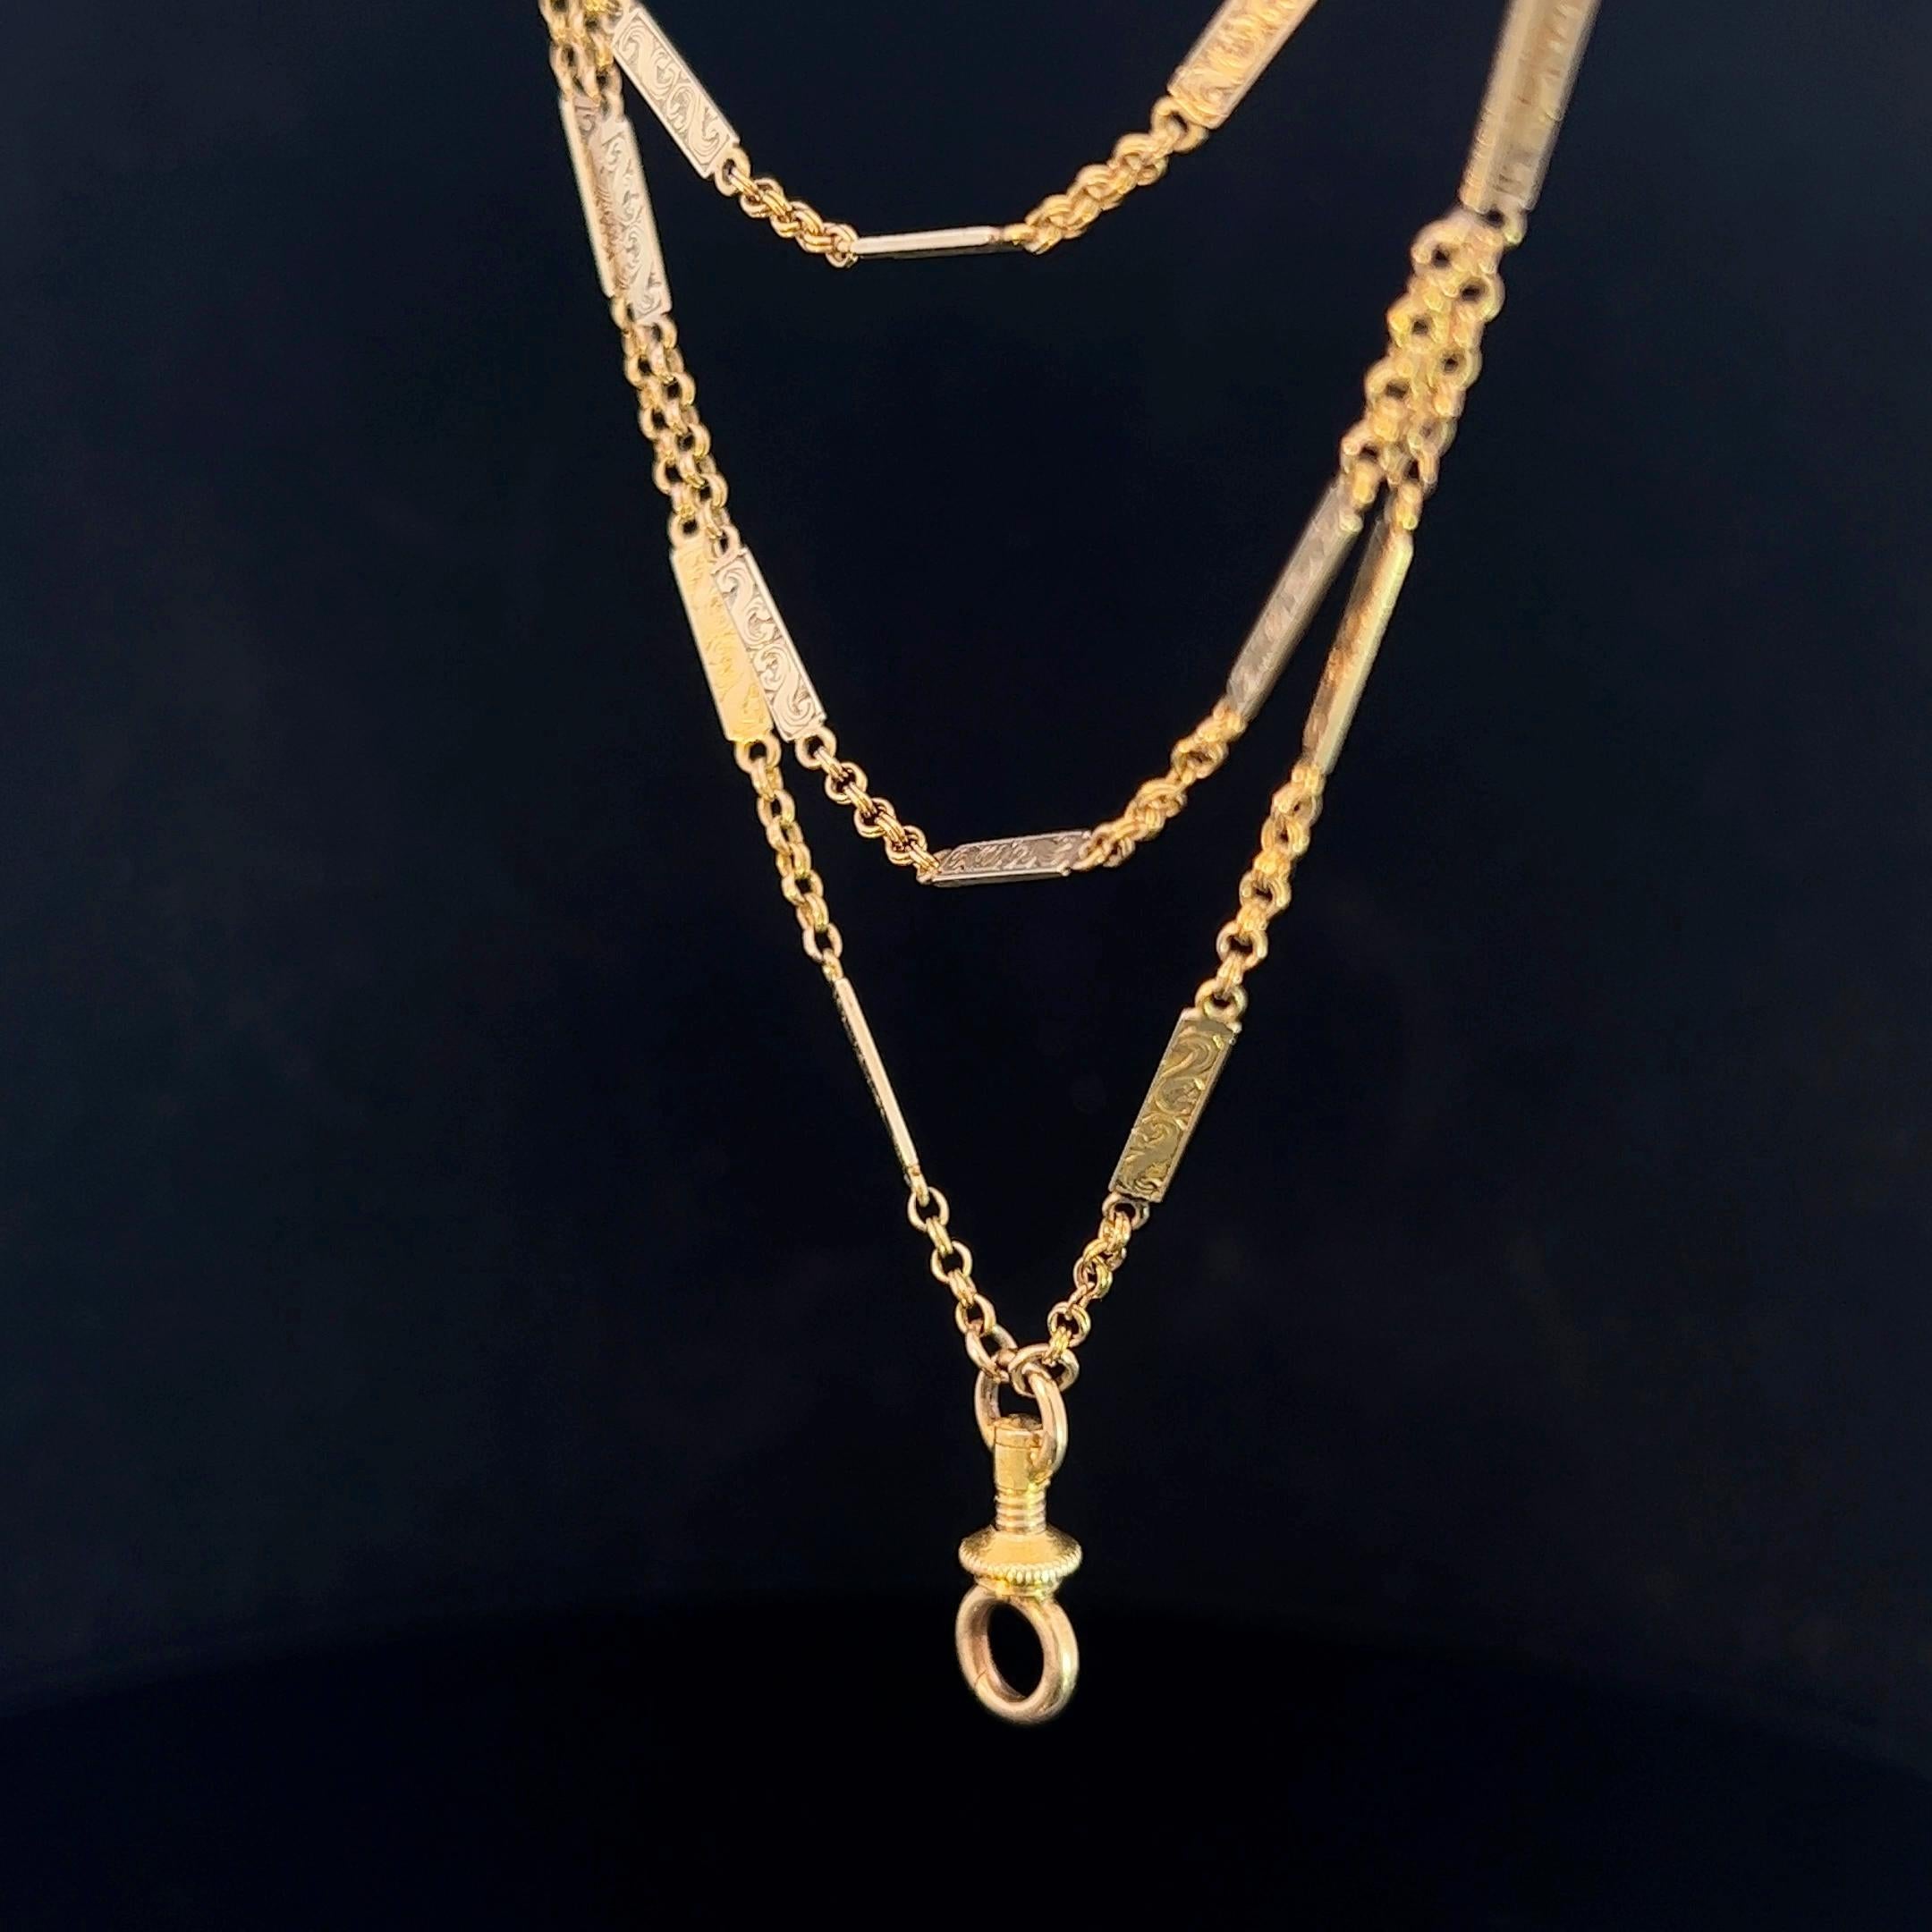 Antique Victorian Long 18k yellow Gold Guard Chain Circa 1890 For Sale 2